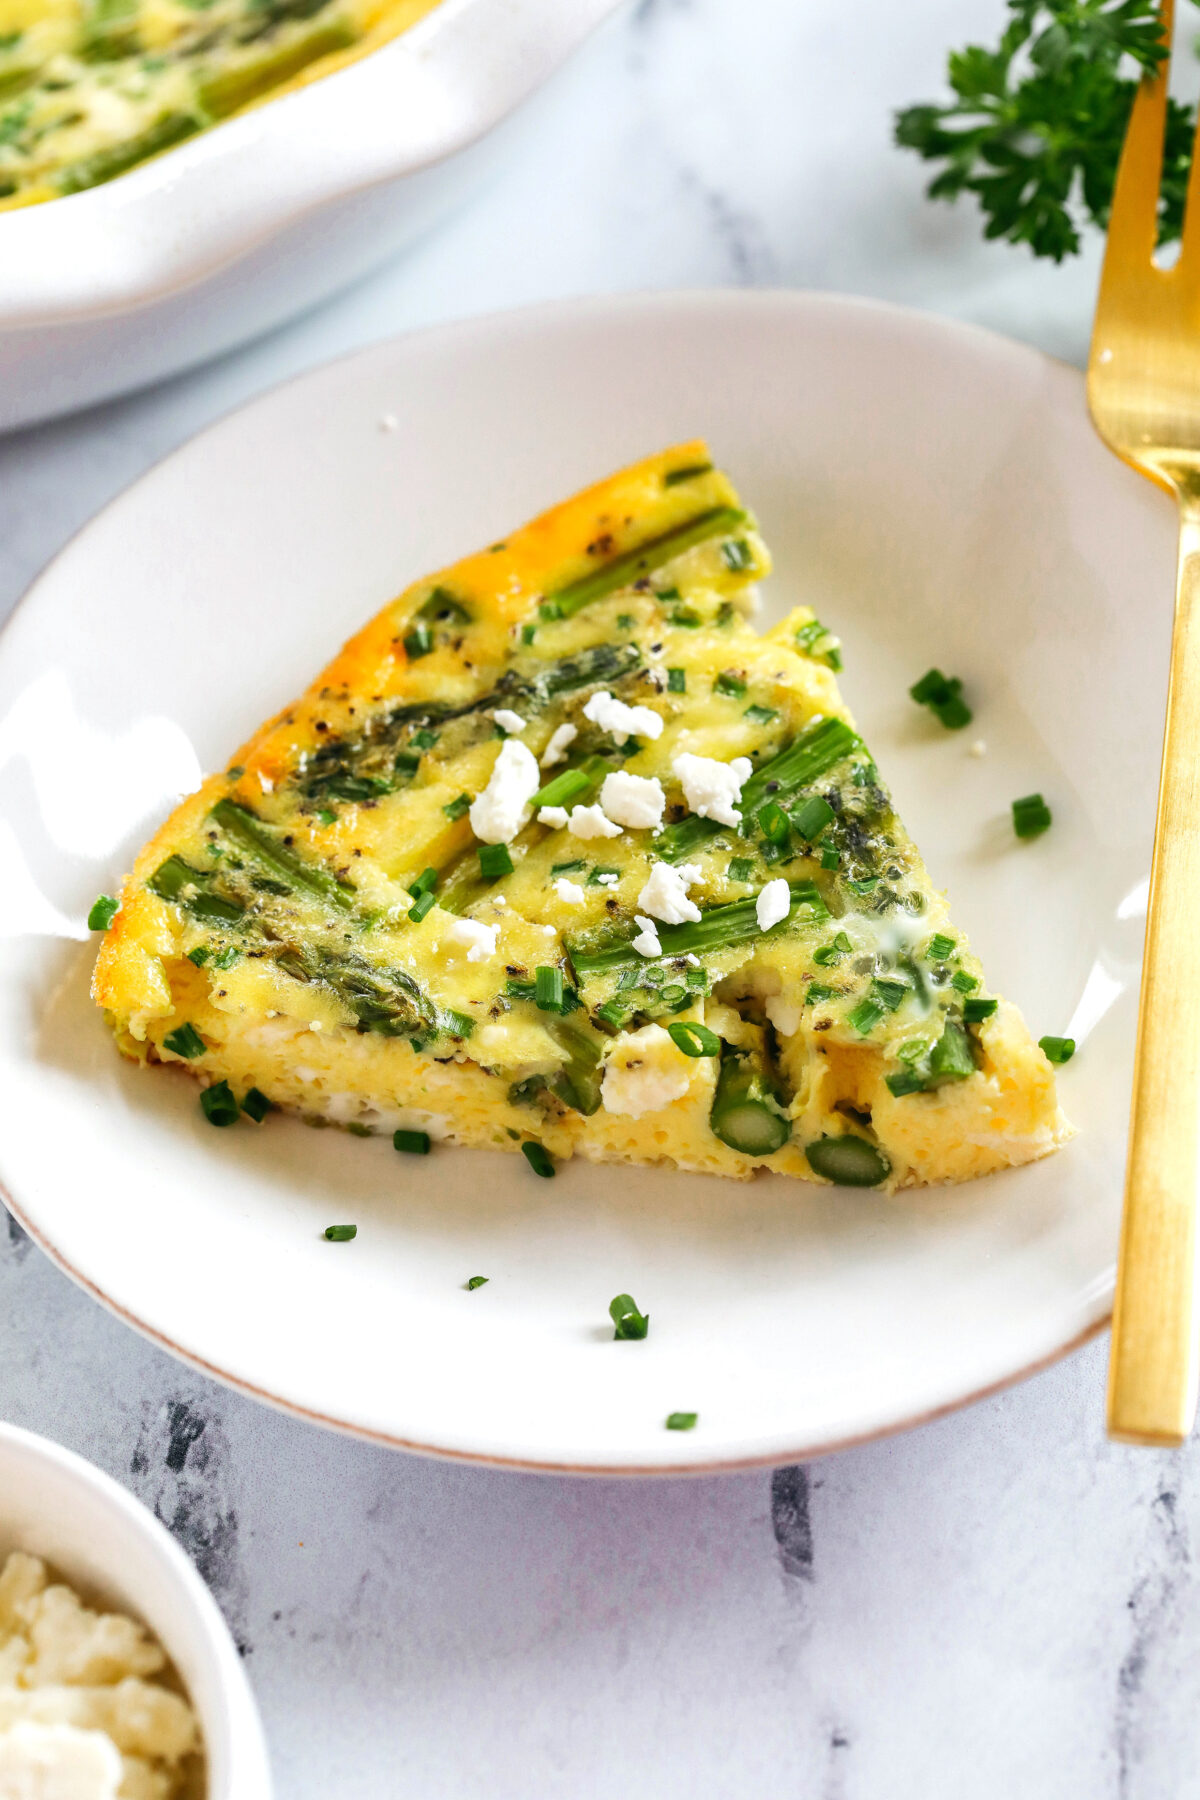 This healthy Asparagus and Feta Crustless Quiche is easily made with just a few simple ingredients, tastes delicious and makes the perfect low-carb dish you can enjoy for any meal!